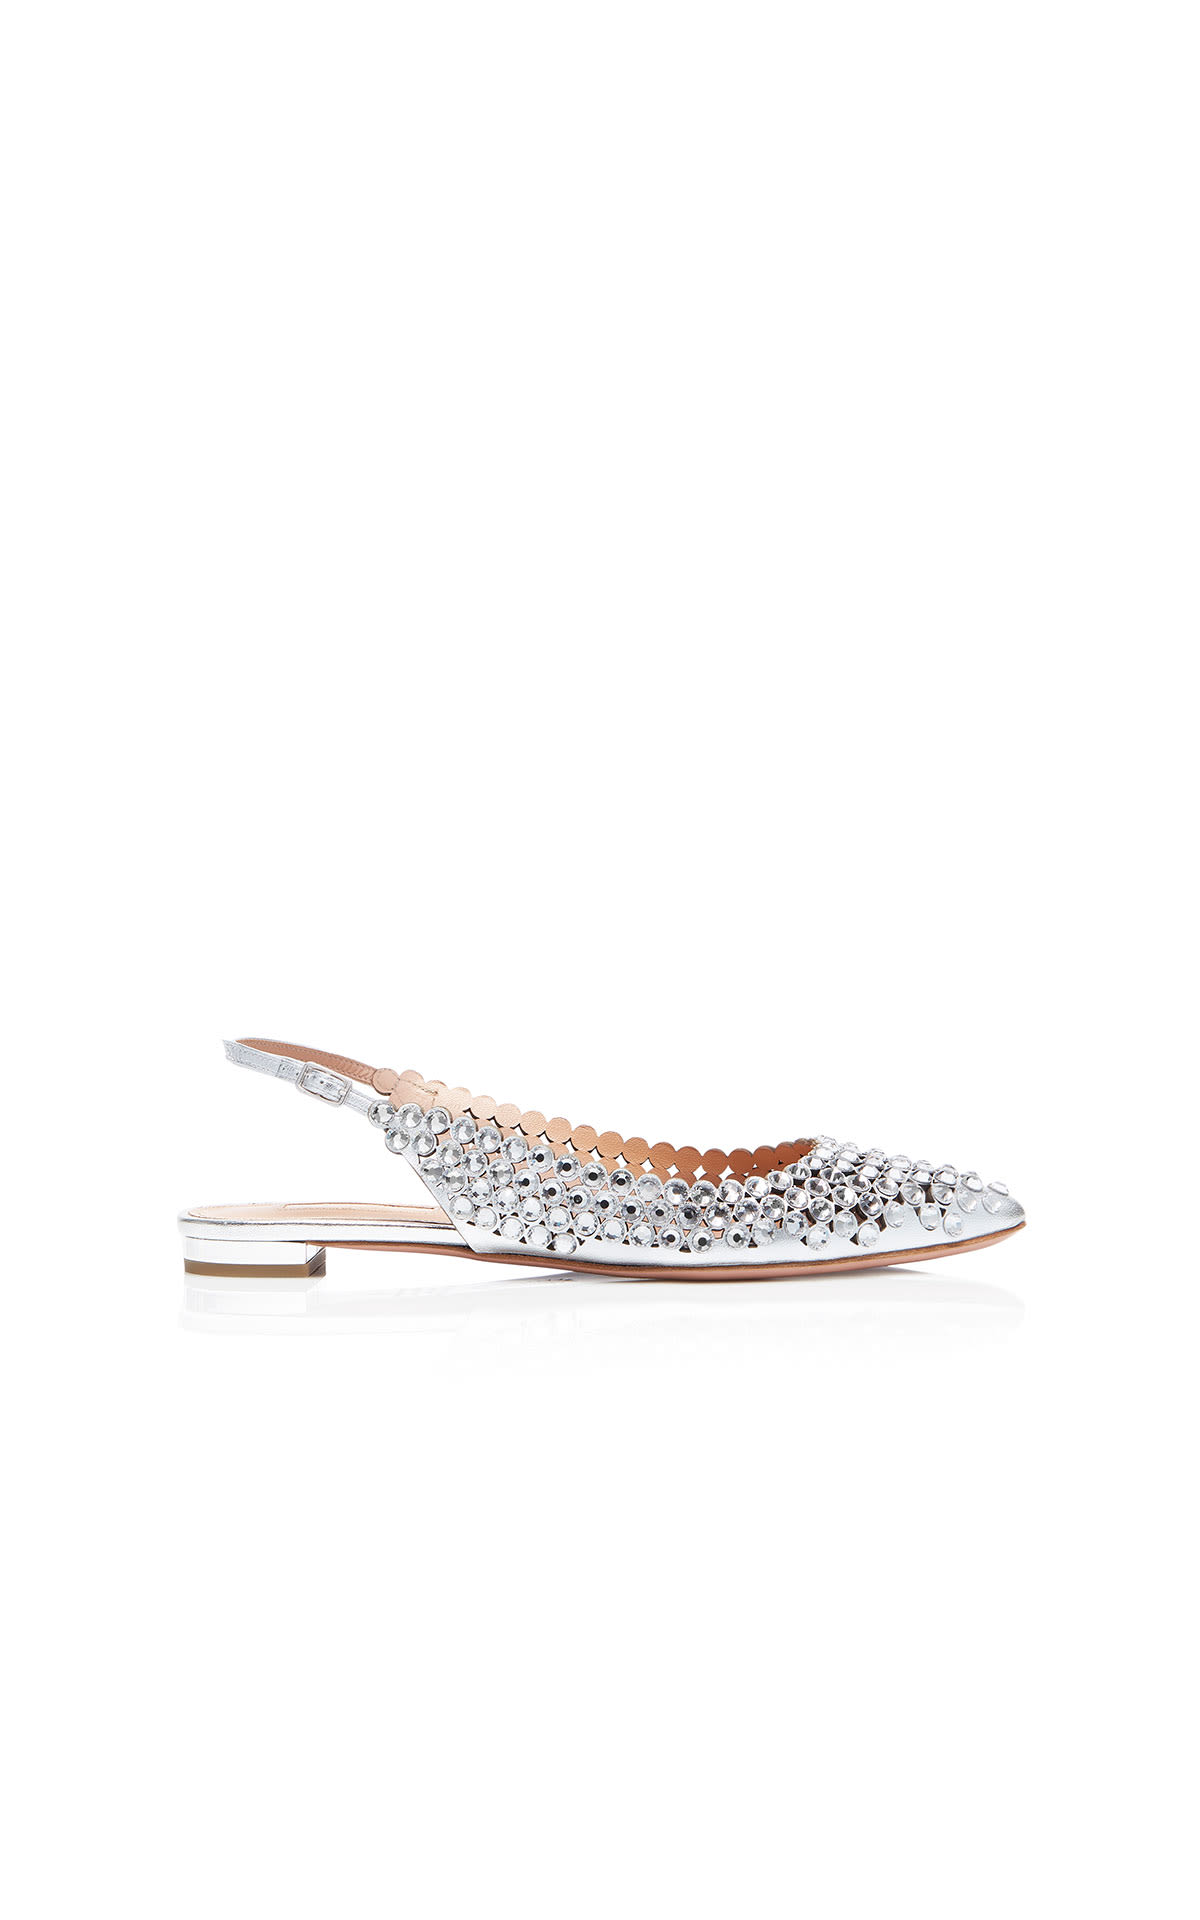 Aquazzura Tequila sling flat silver from Bicester Village